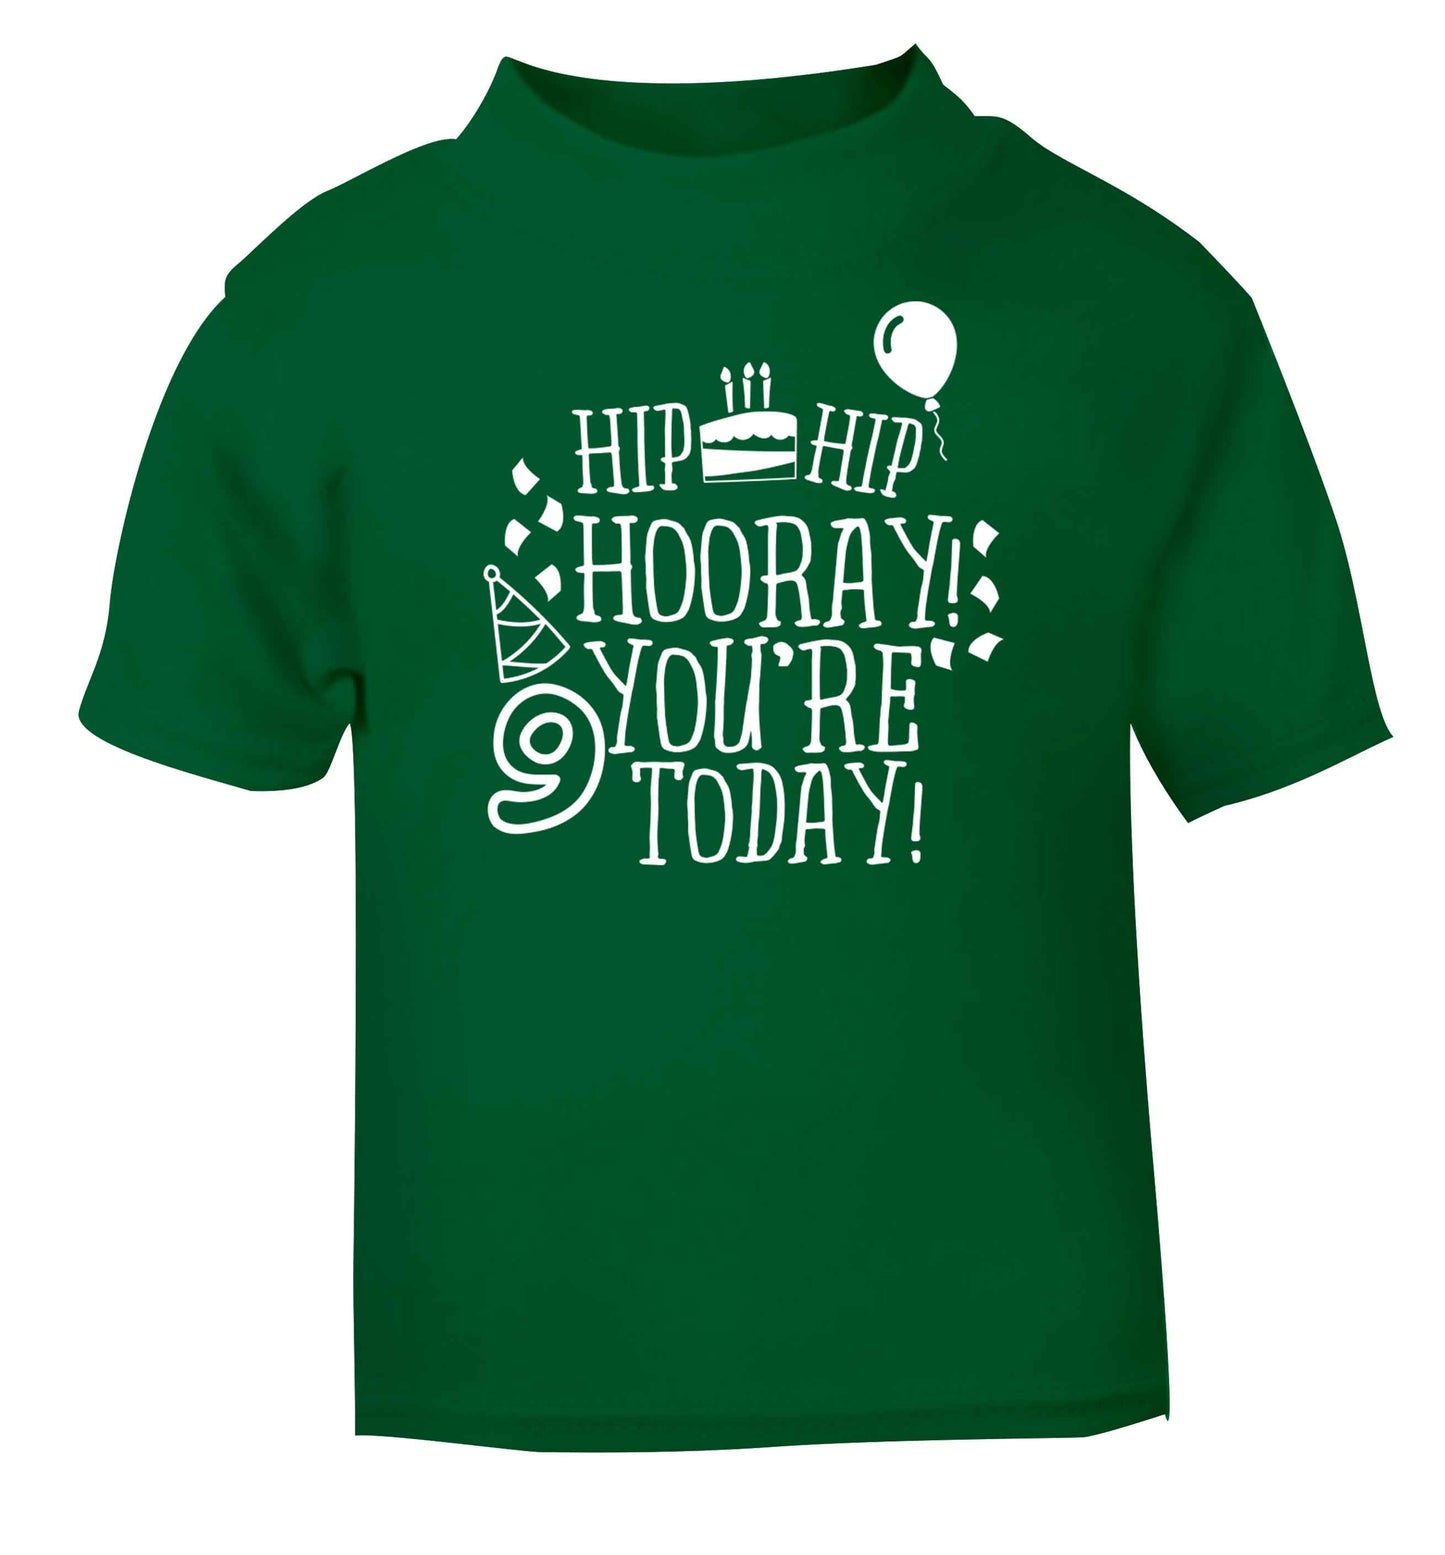 Hip hip hooray you're 9 today! green baby toddler Tshirt 2 Years